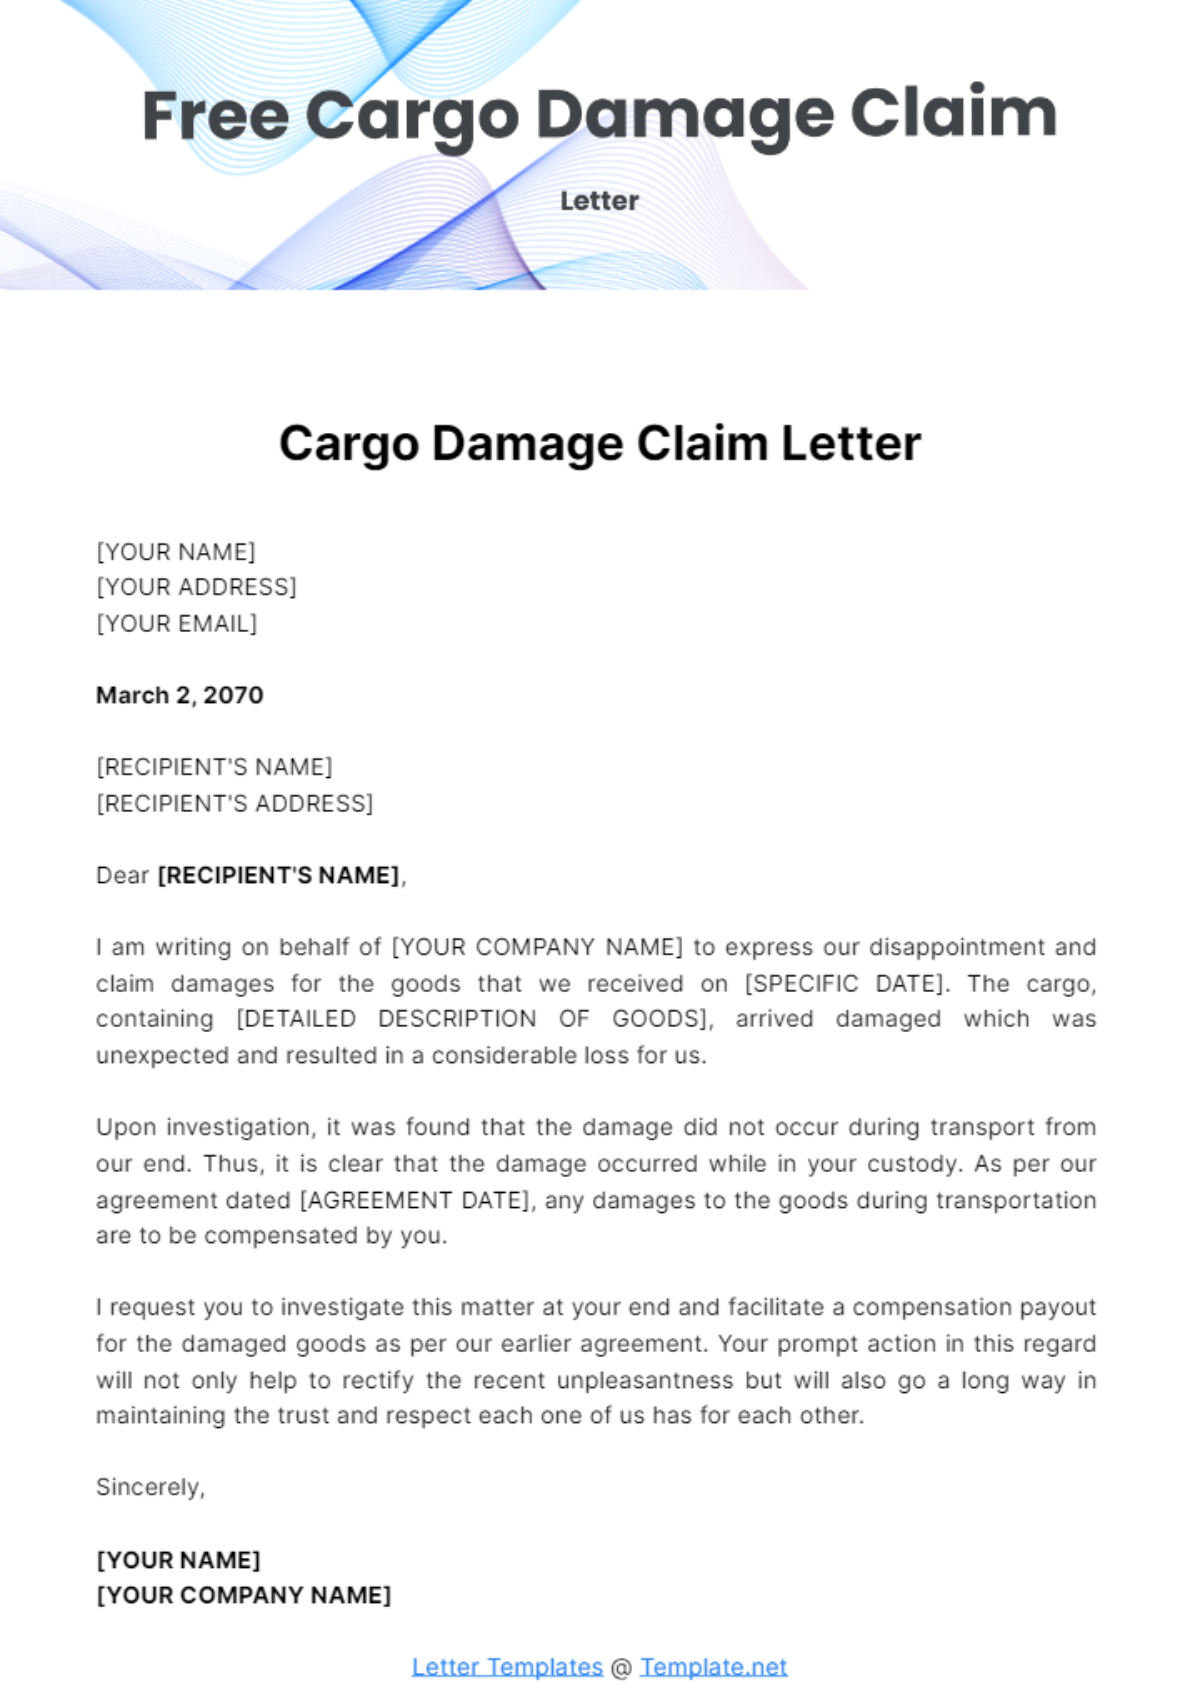 Free Cargo Damage Claim Letter Template